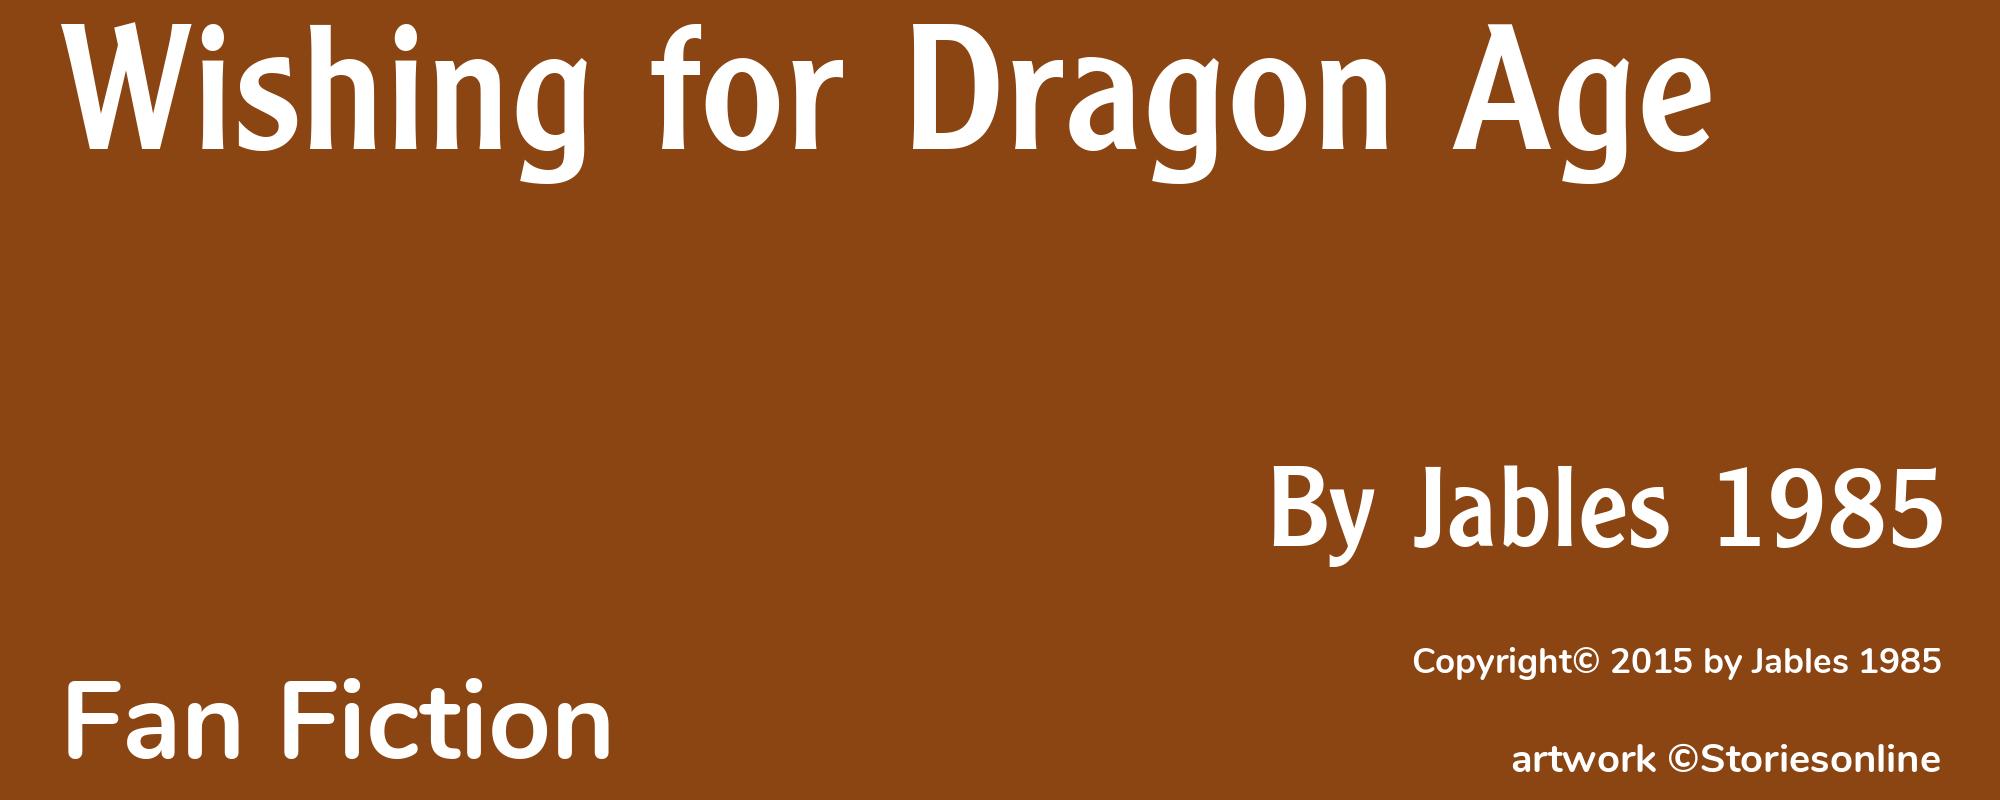 Wishing for Dragon Age - Cover